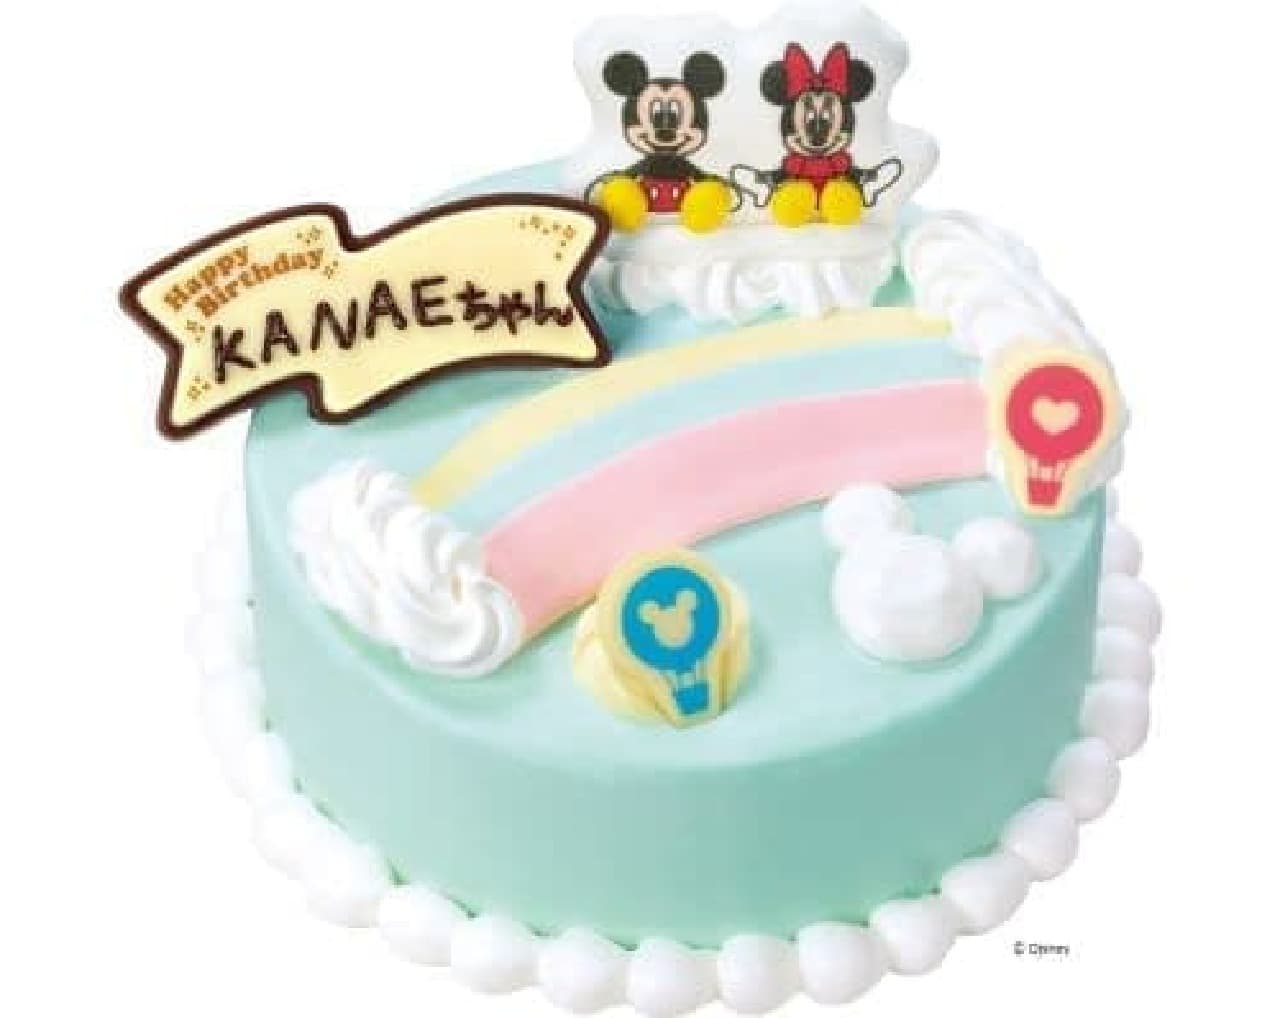 "'Mickey & Minnie'Rainbow Picnic" is an ice cream cake decorated with sugar confectionery Mickey and Minnie.